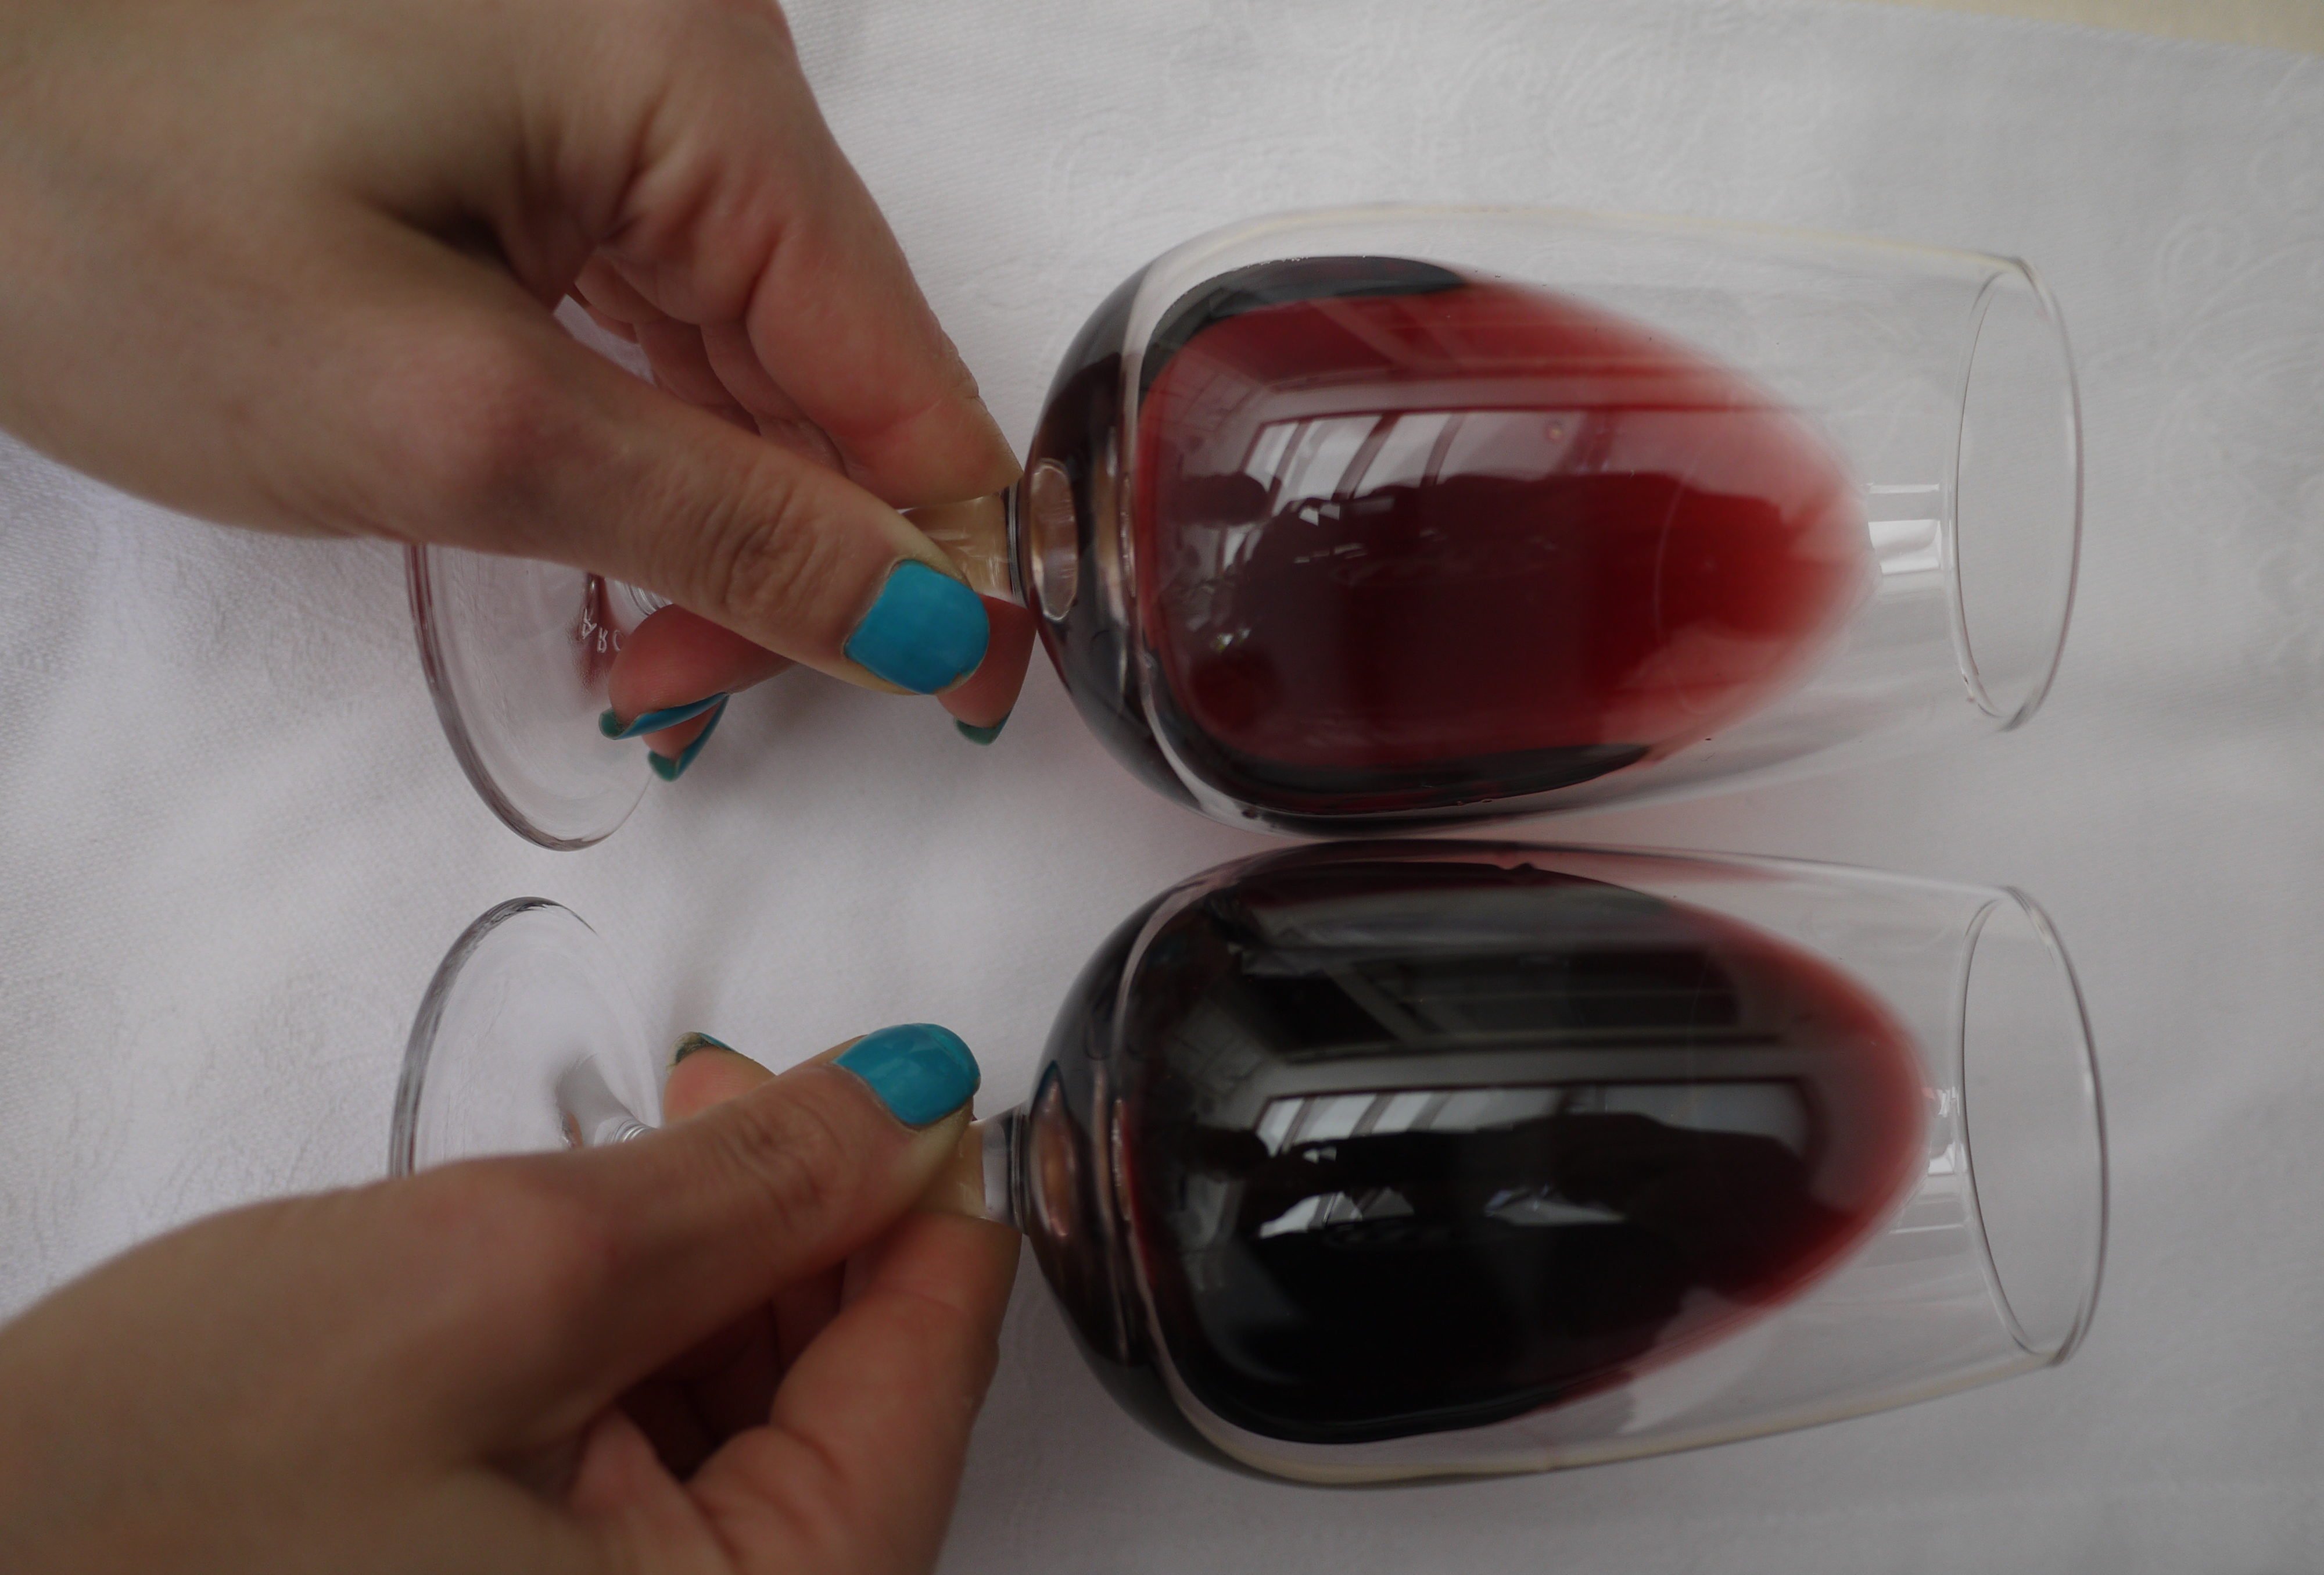 Holding wine at an angle to assess colour intensity: here showing medium and deep ruby.